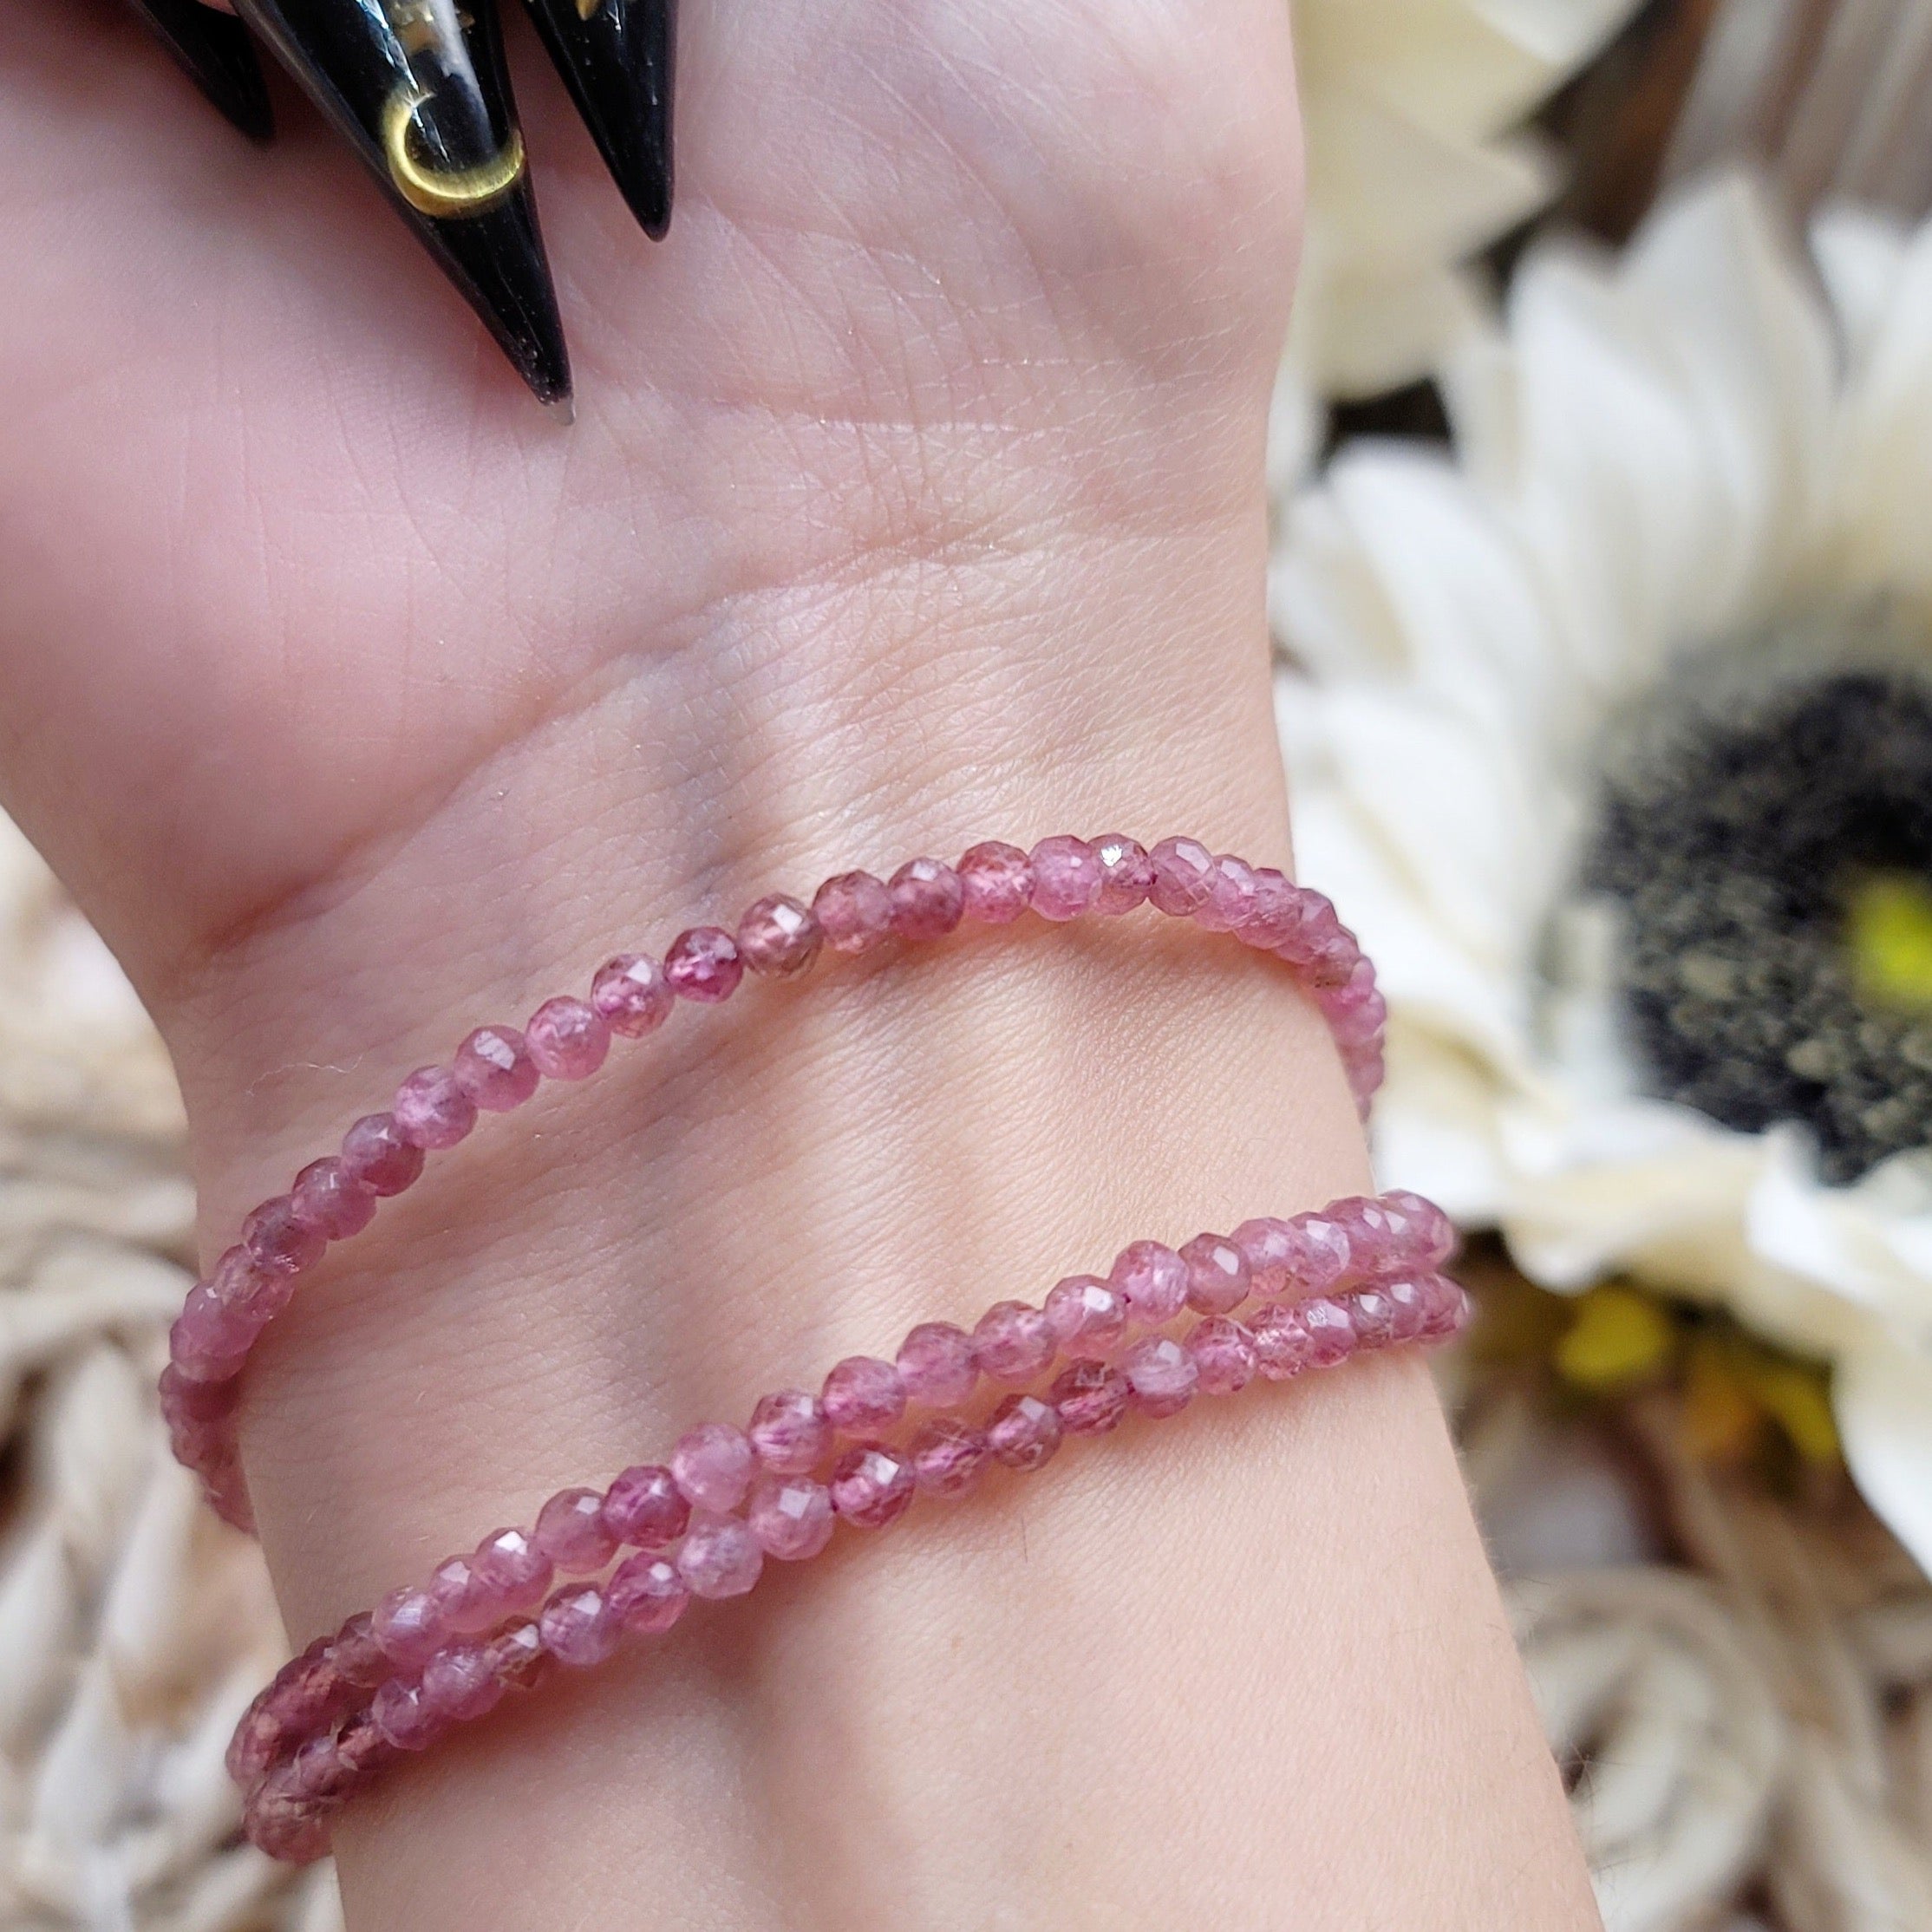 Pink Tourmaline Faceted Bracelet With Magnetic Clasps for Compassion, Joy, Opening Heart to Love & Wisdom